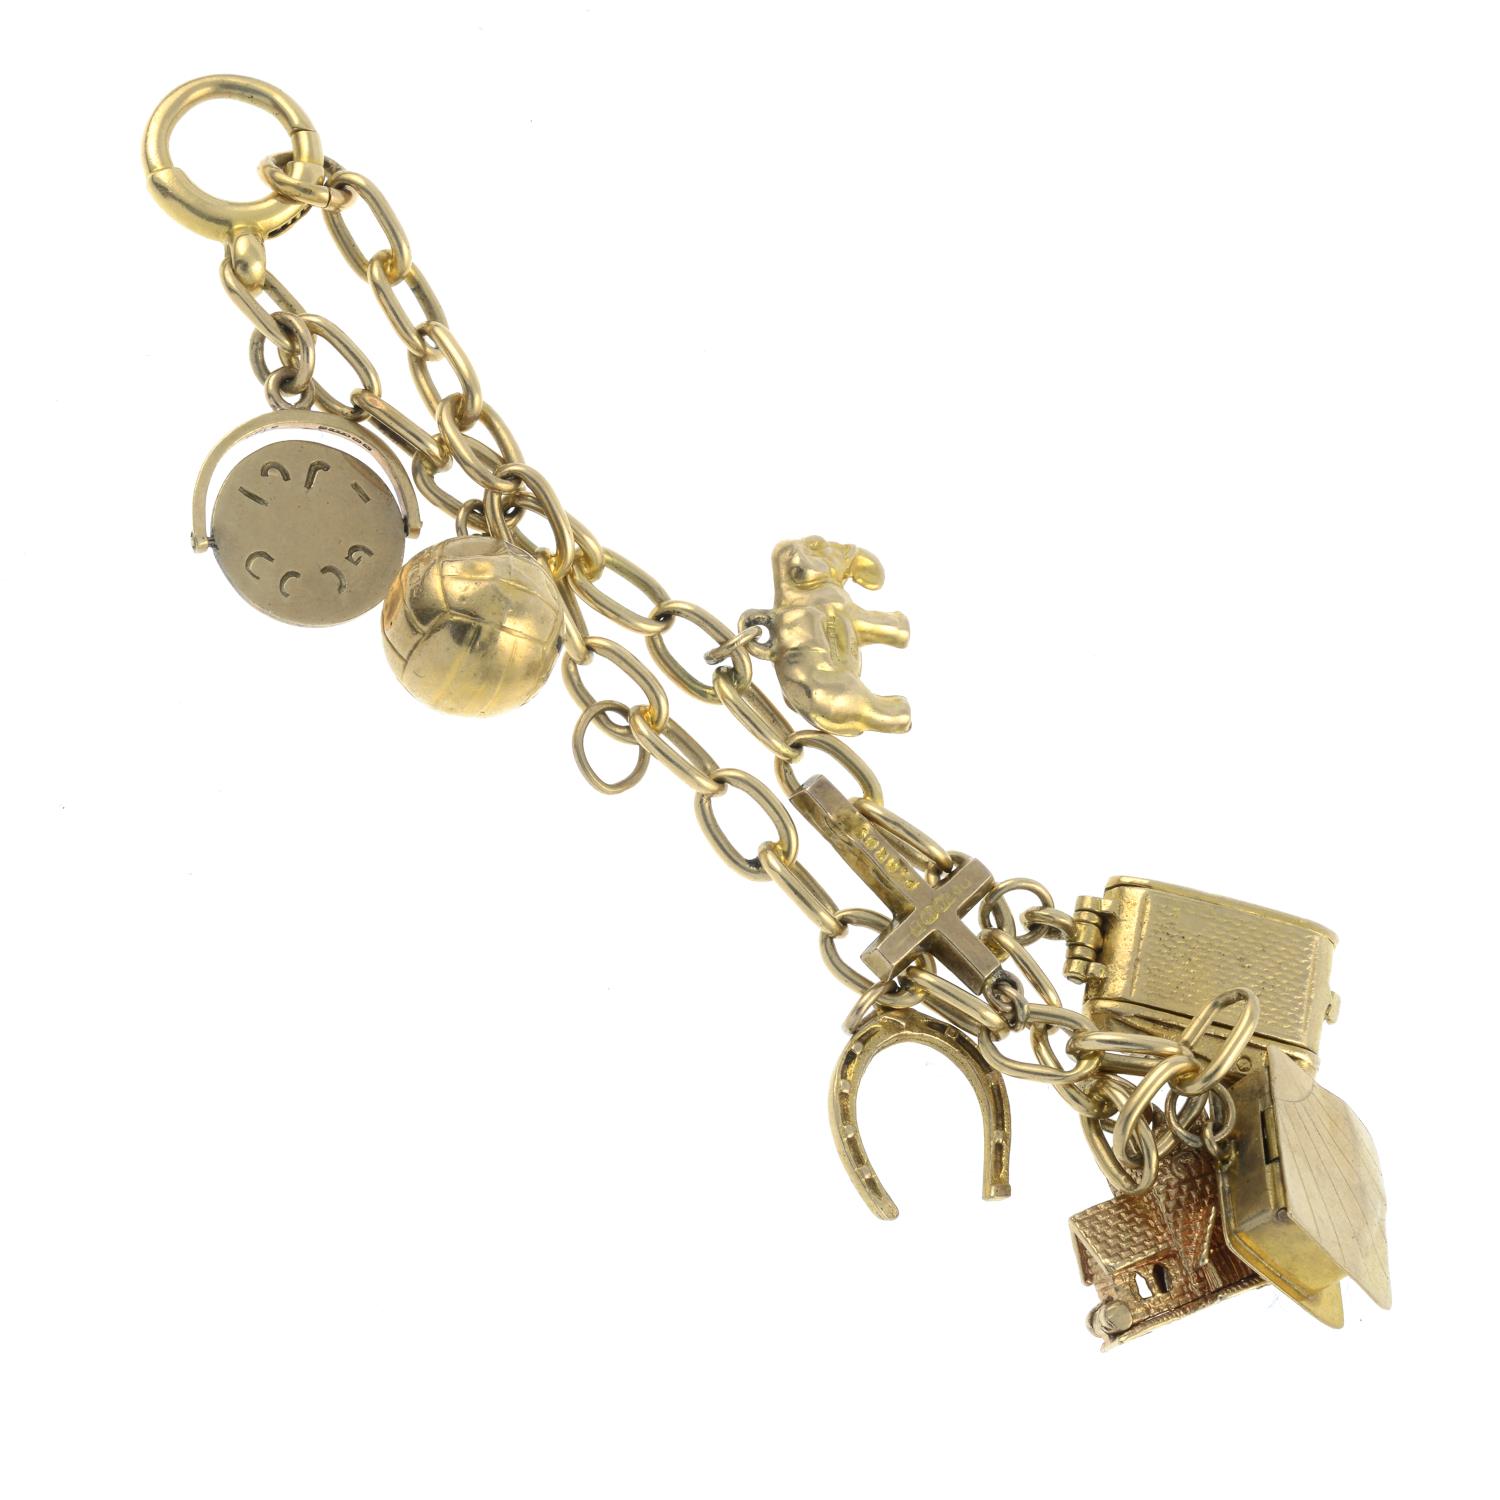 An 18ct gold bracelet, suspending eight 9ct gold charms.Bracelet with hallmarks for 18ct gold. - Image 2 of 2